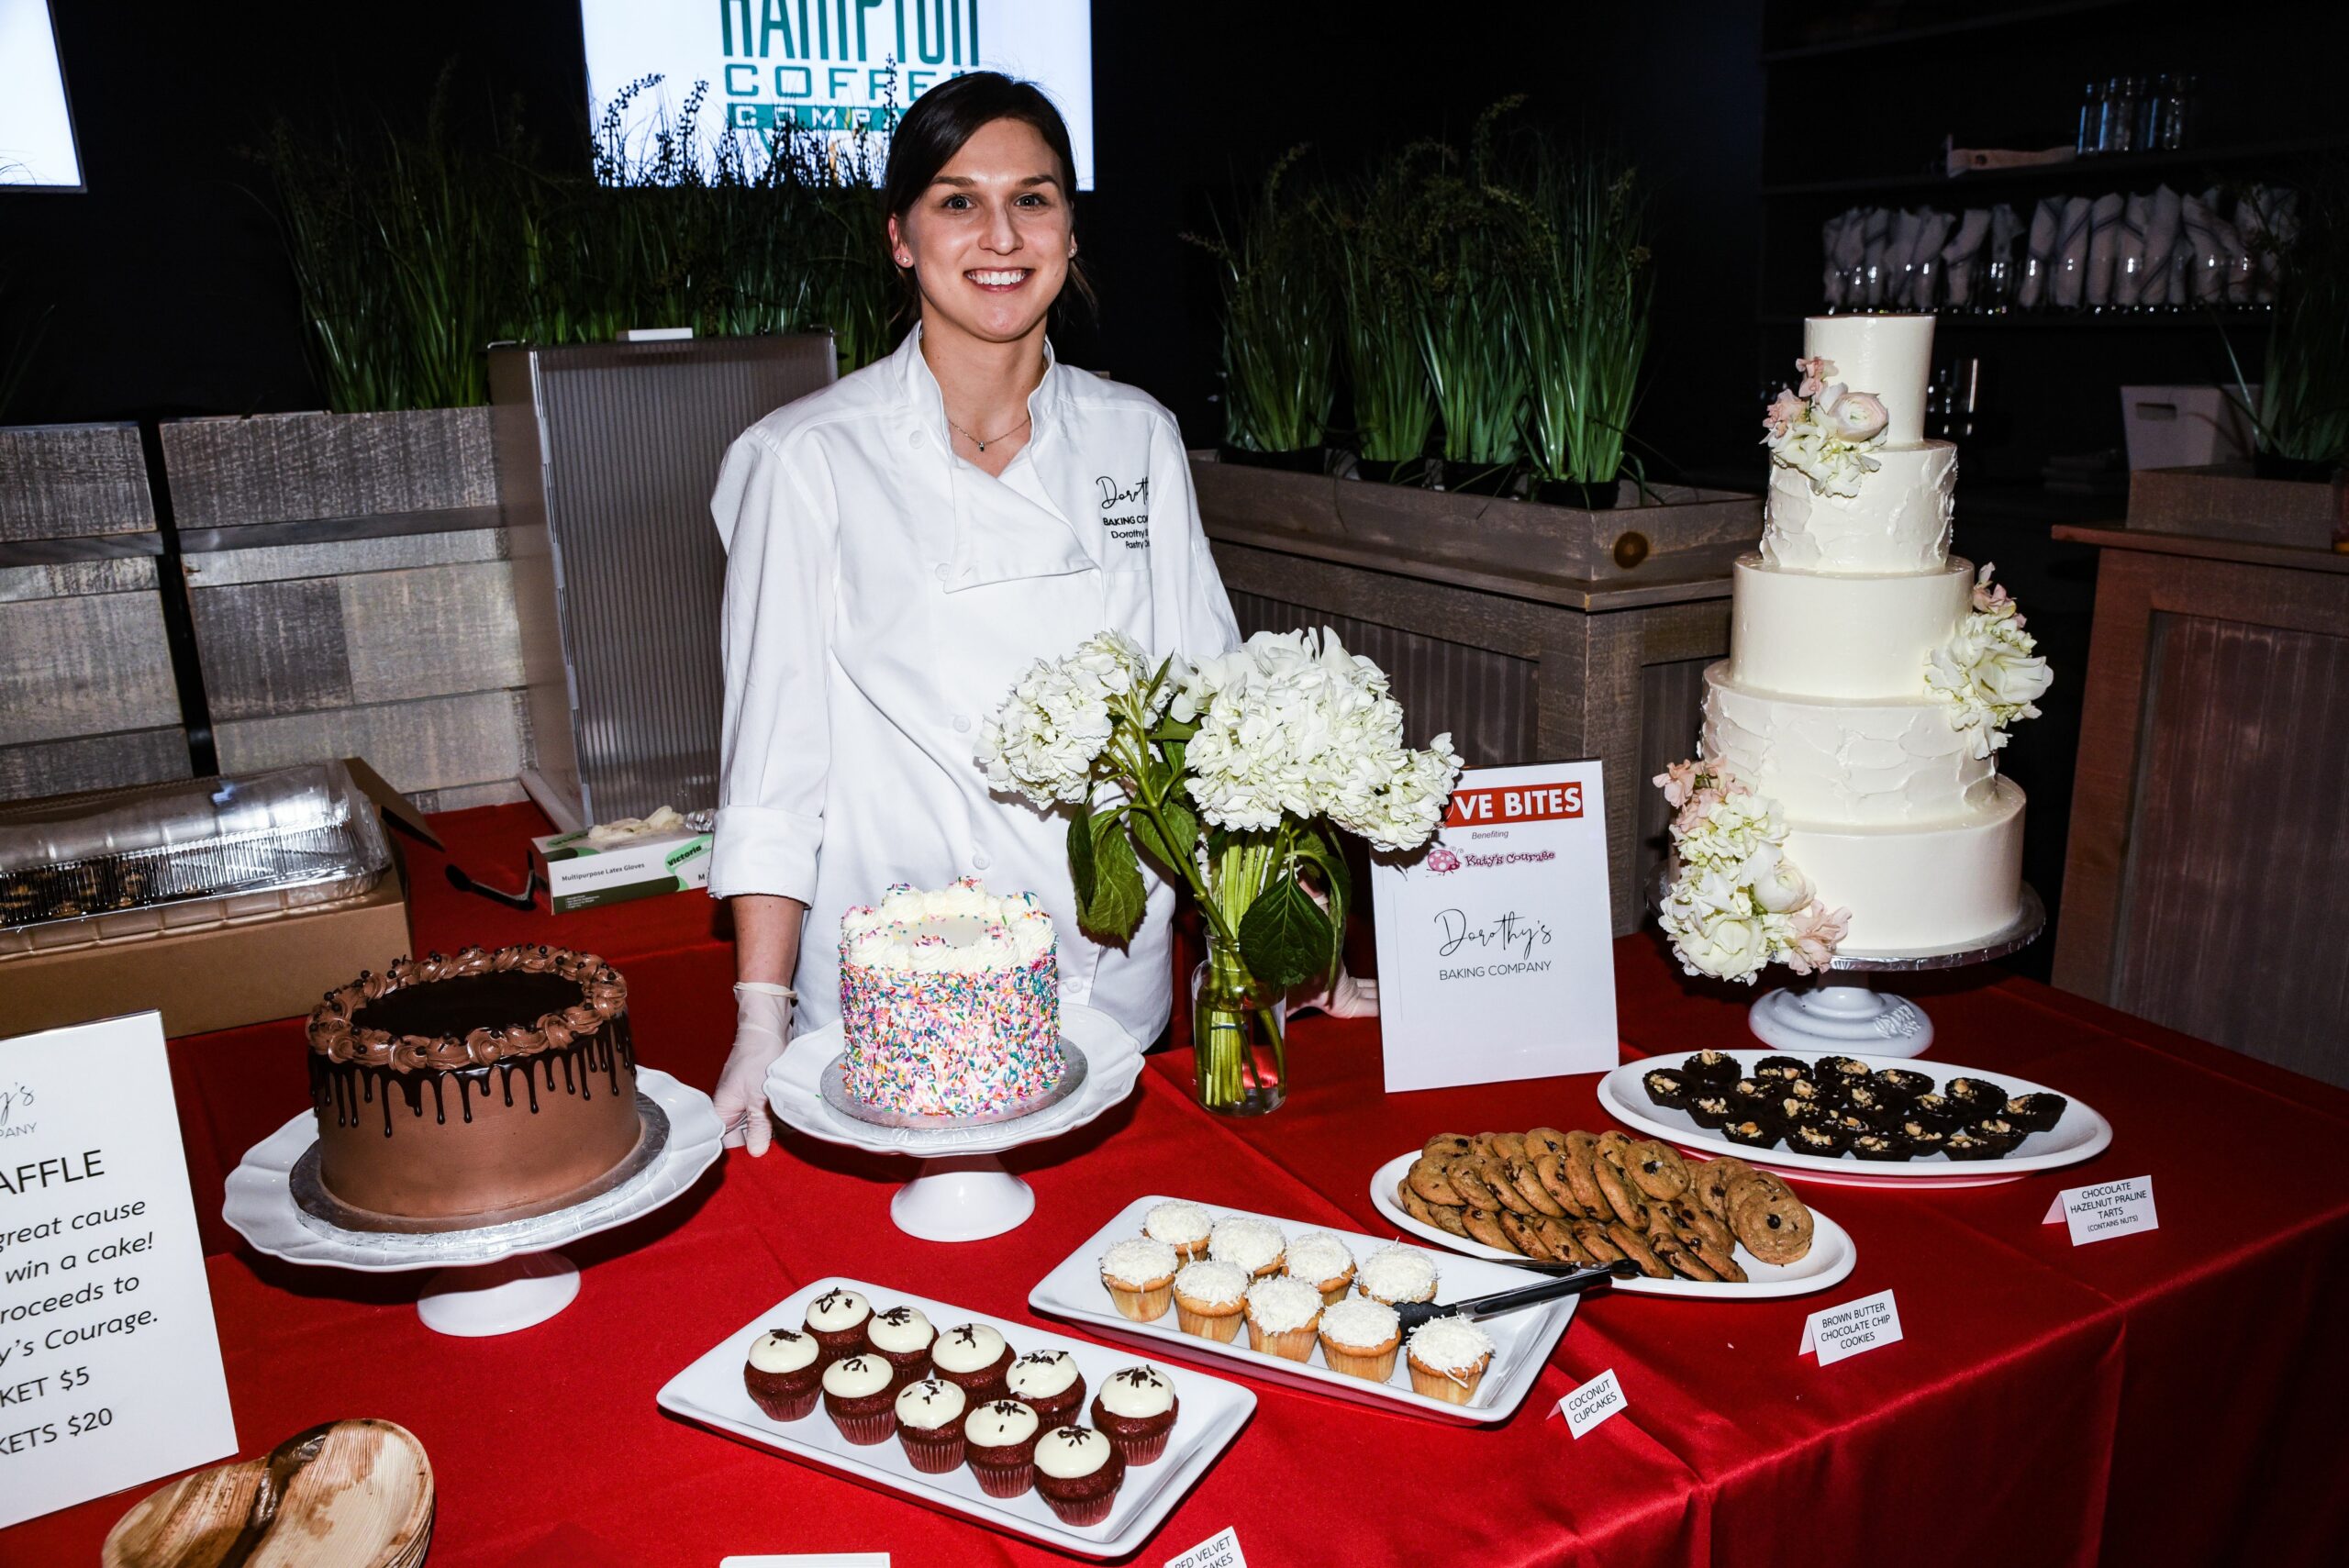 Some sweet tasting offerings at Love Bites in 2020, an annual event to benefit Katy’s Courage. COURTESY KATY'S COURAGE